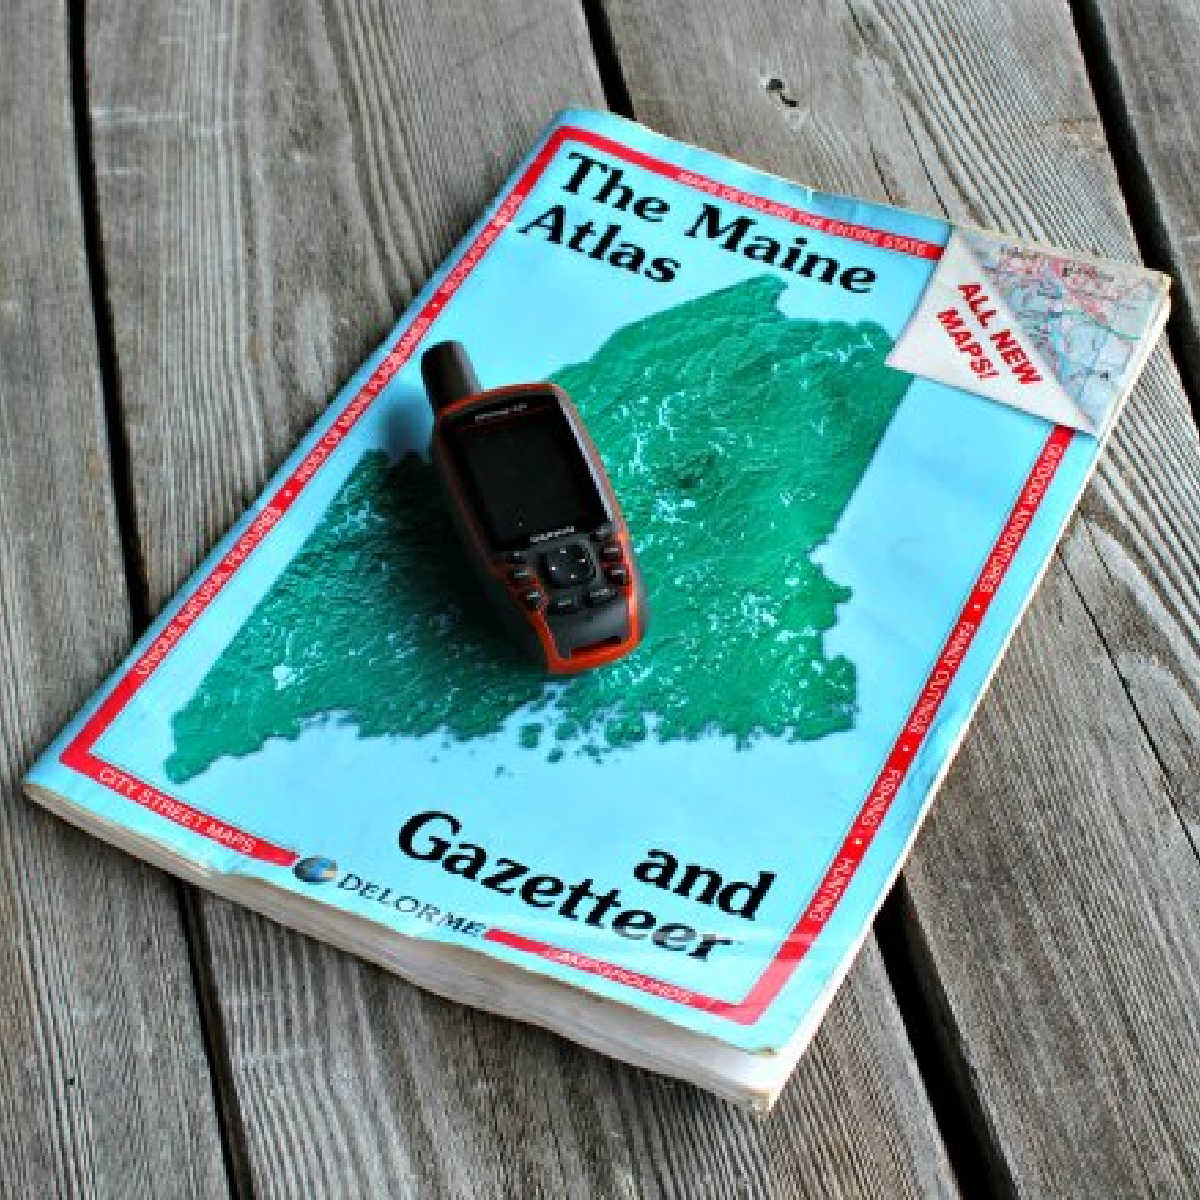 The Delorme Maine Atlas is a necessity for exploring the backroads of Maine.